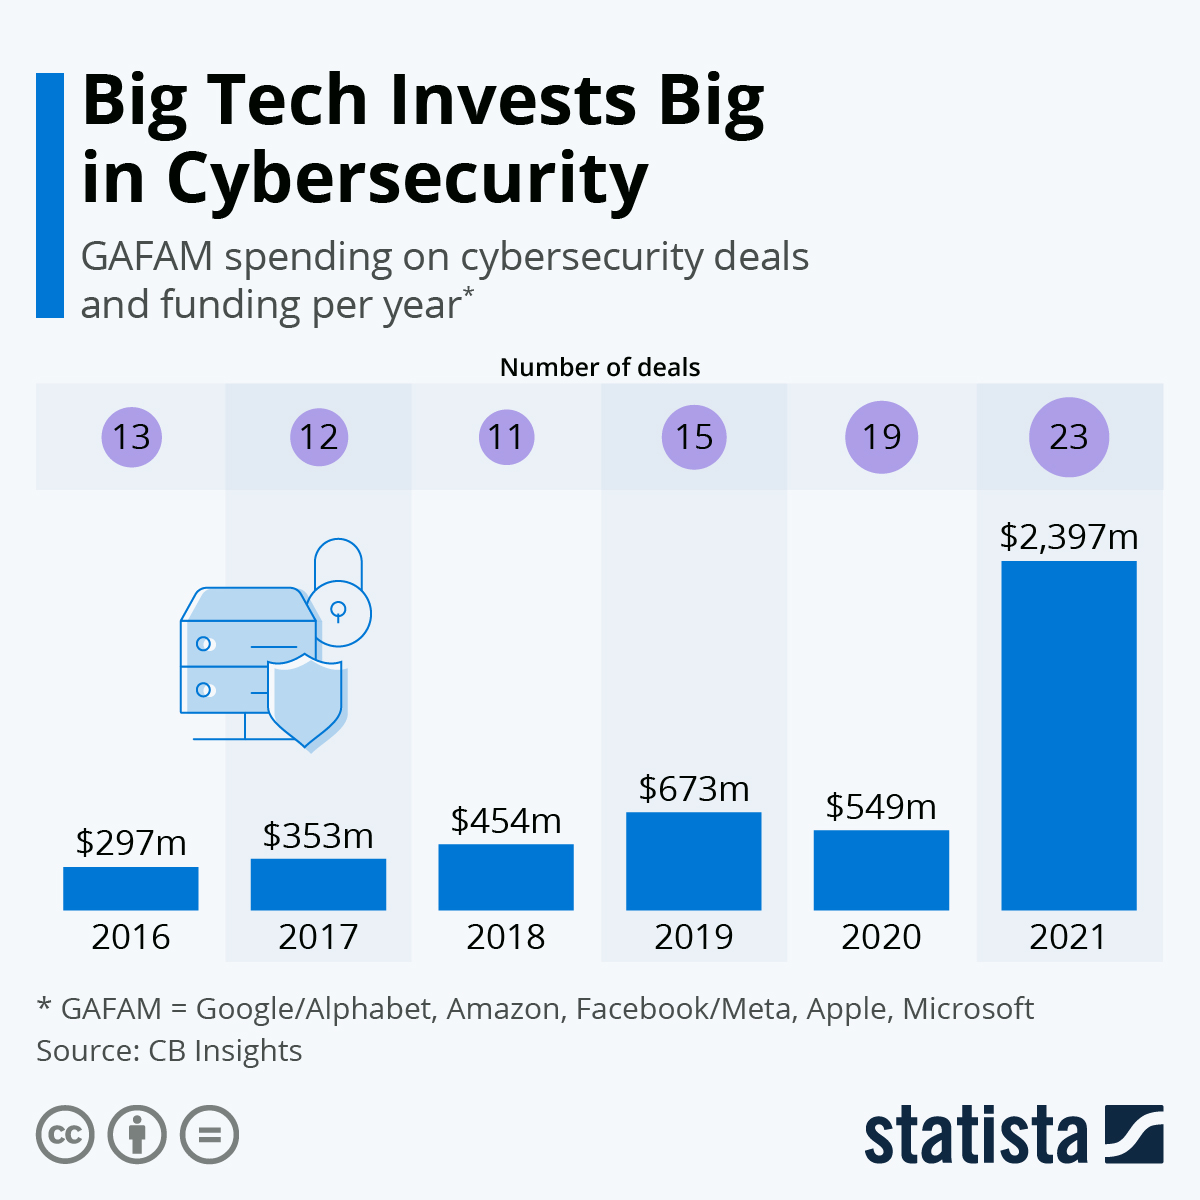 Big Tech Invests Big in Cybersecurity